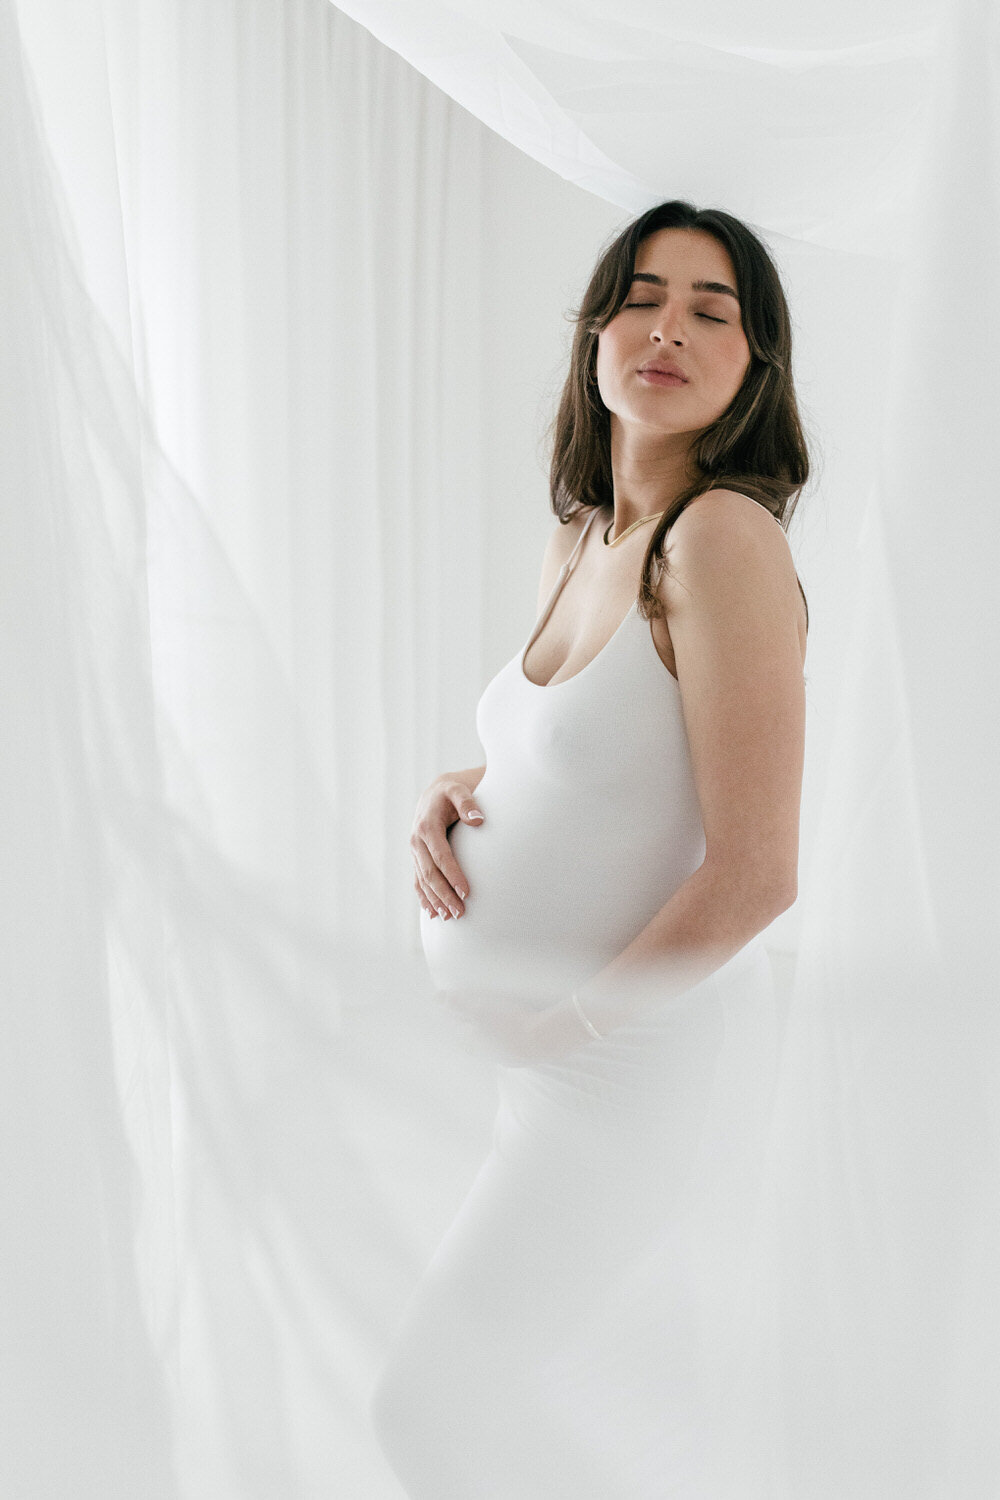 Pregnant women in white studio with eyes closed holding her belly